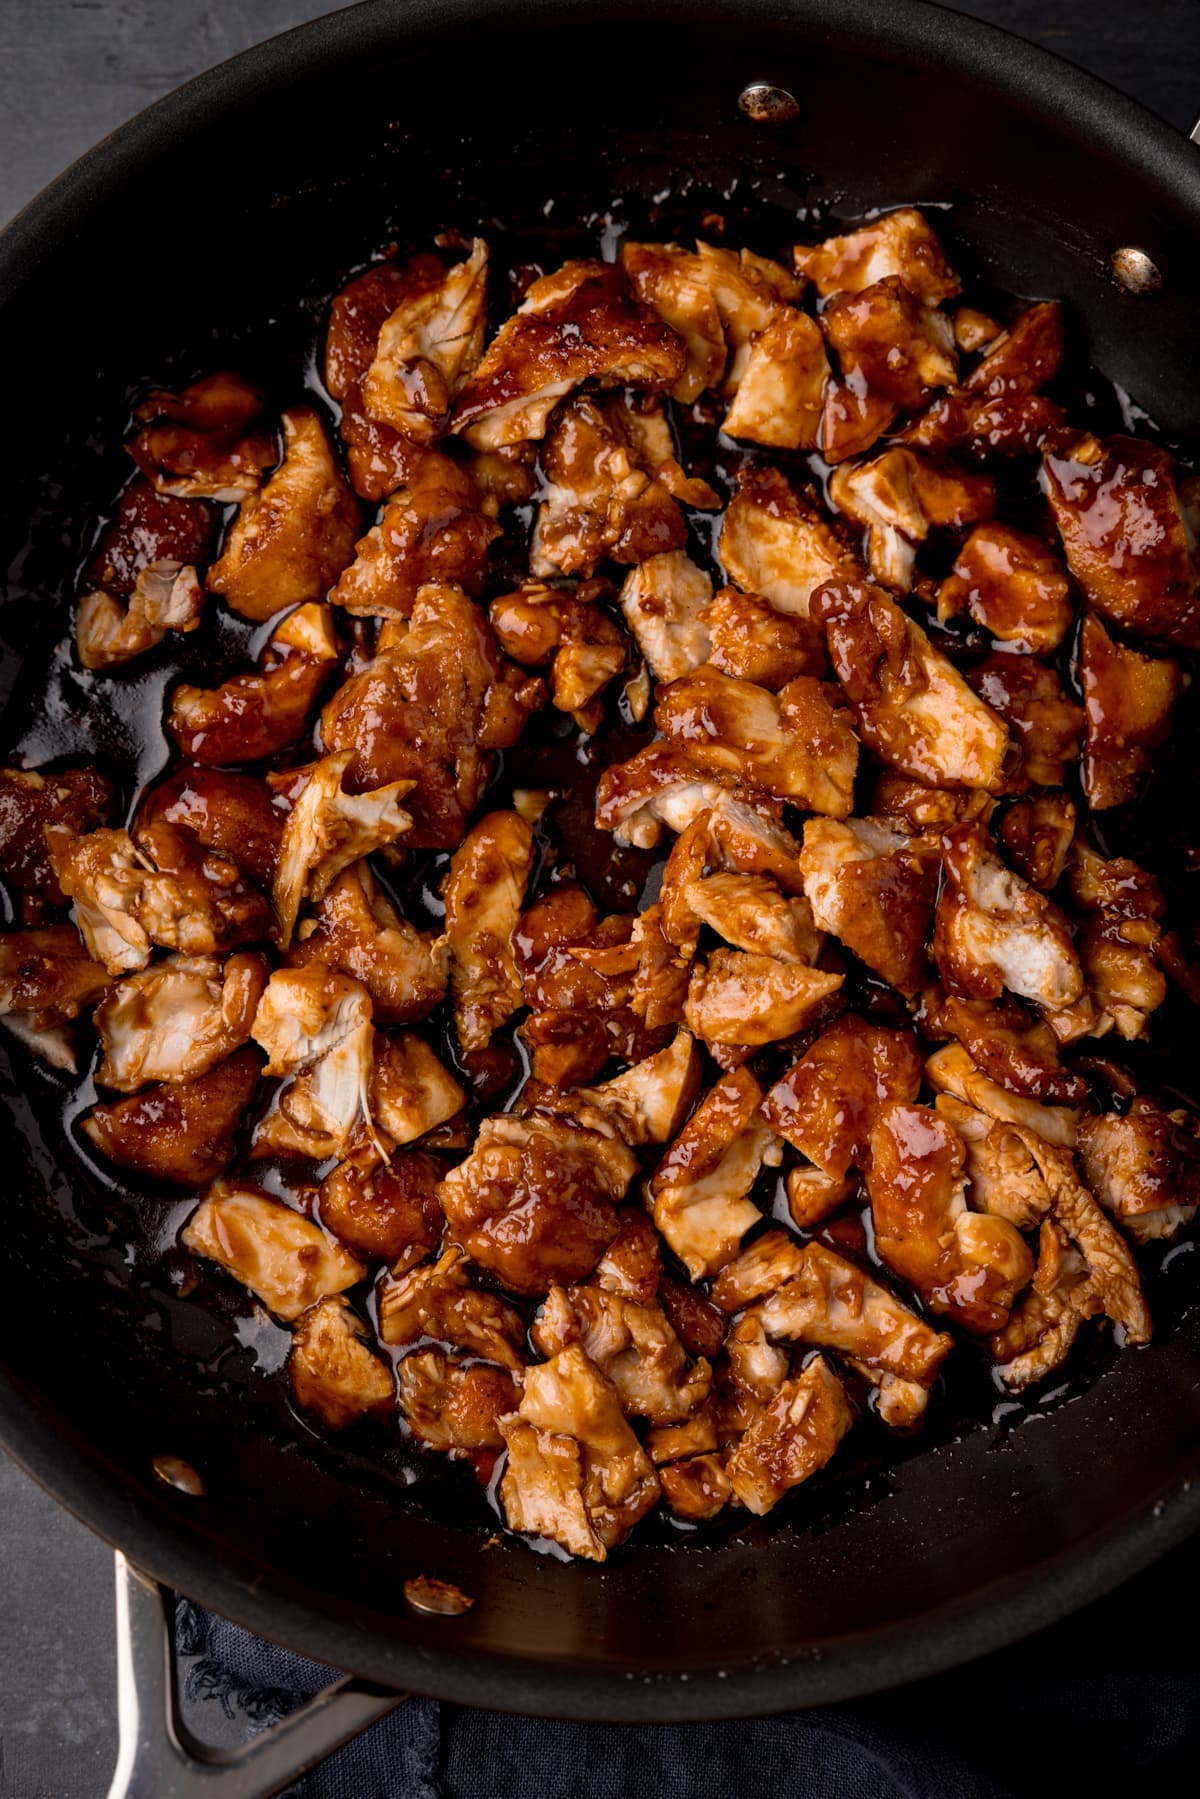 A tall shot of the bourbon chicken in a dark grey pan. The pan is resting on a grey background with a dark blue napkin.